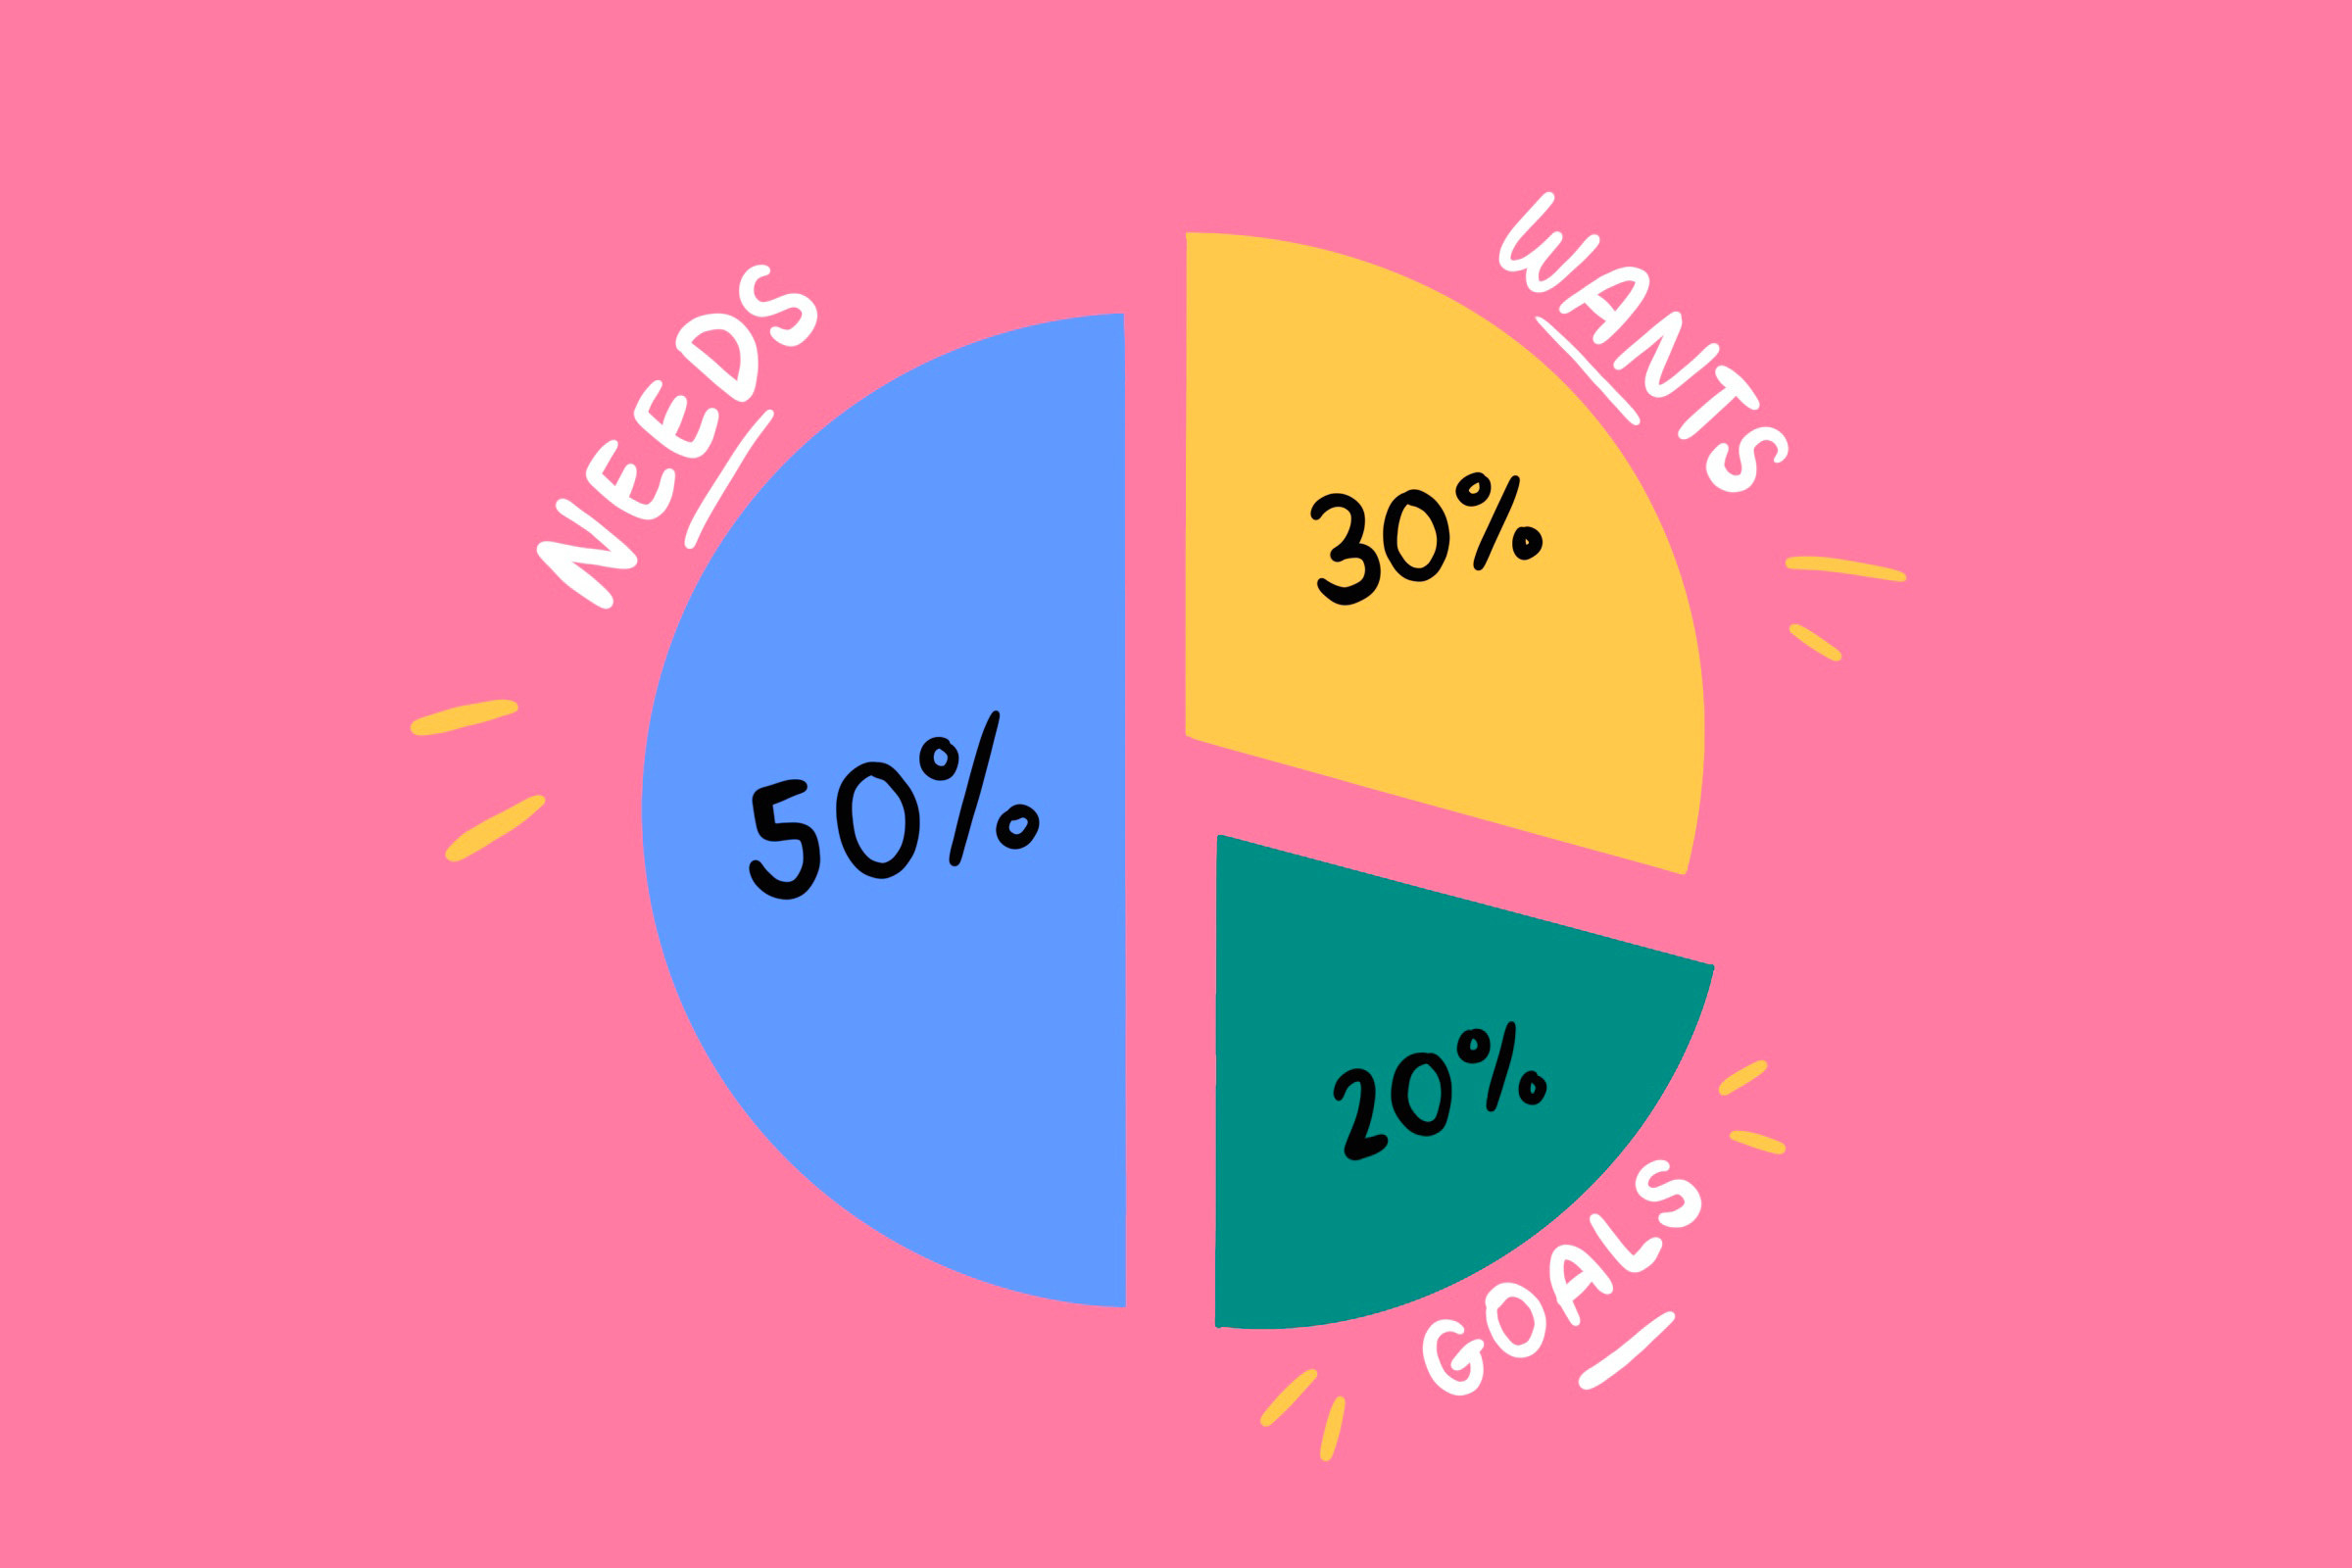 Circle broken up into 50% for needs, 30% for wants, and 20% for goals